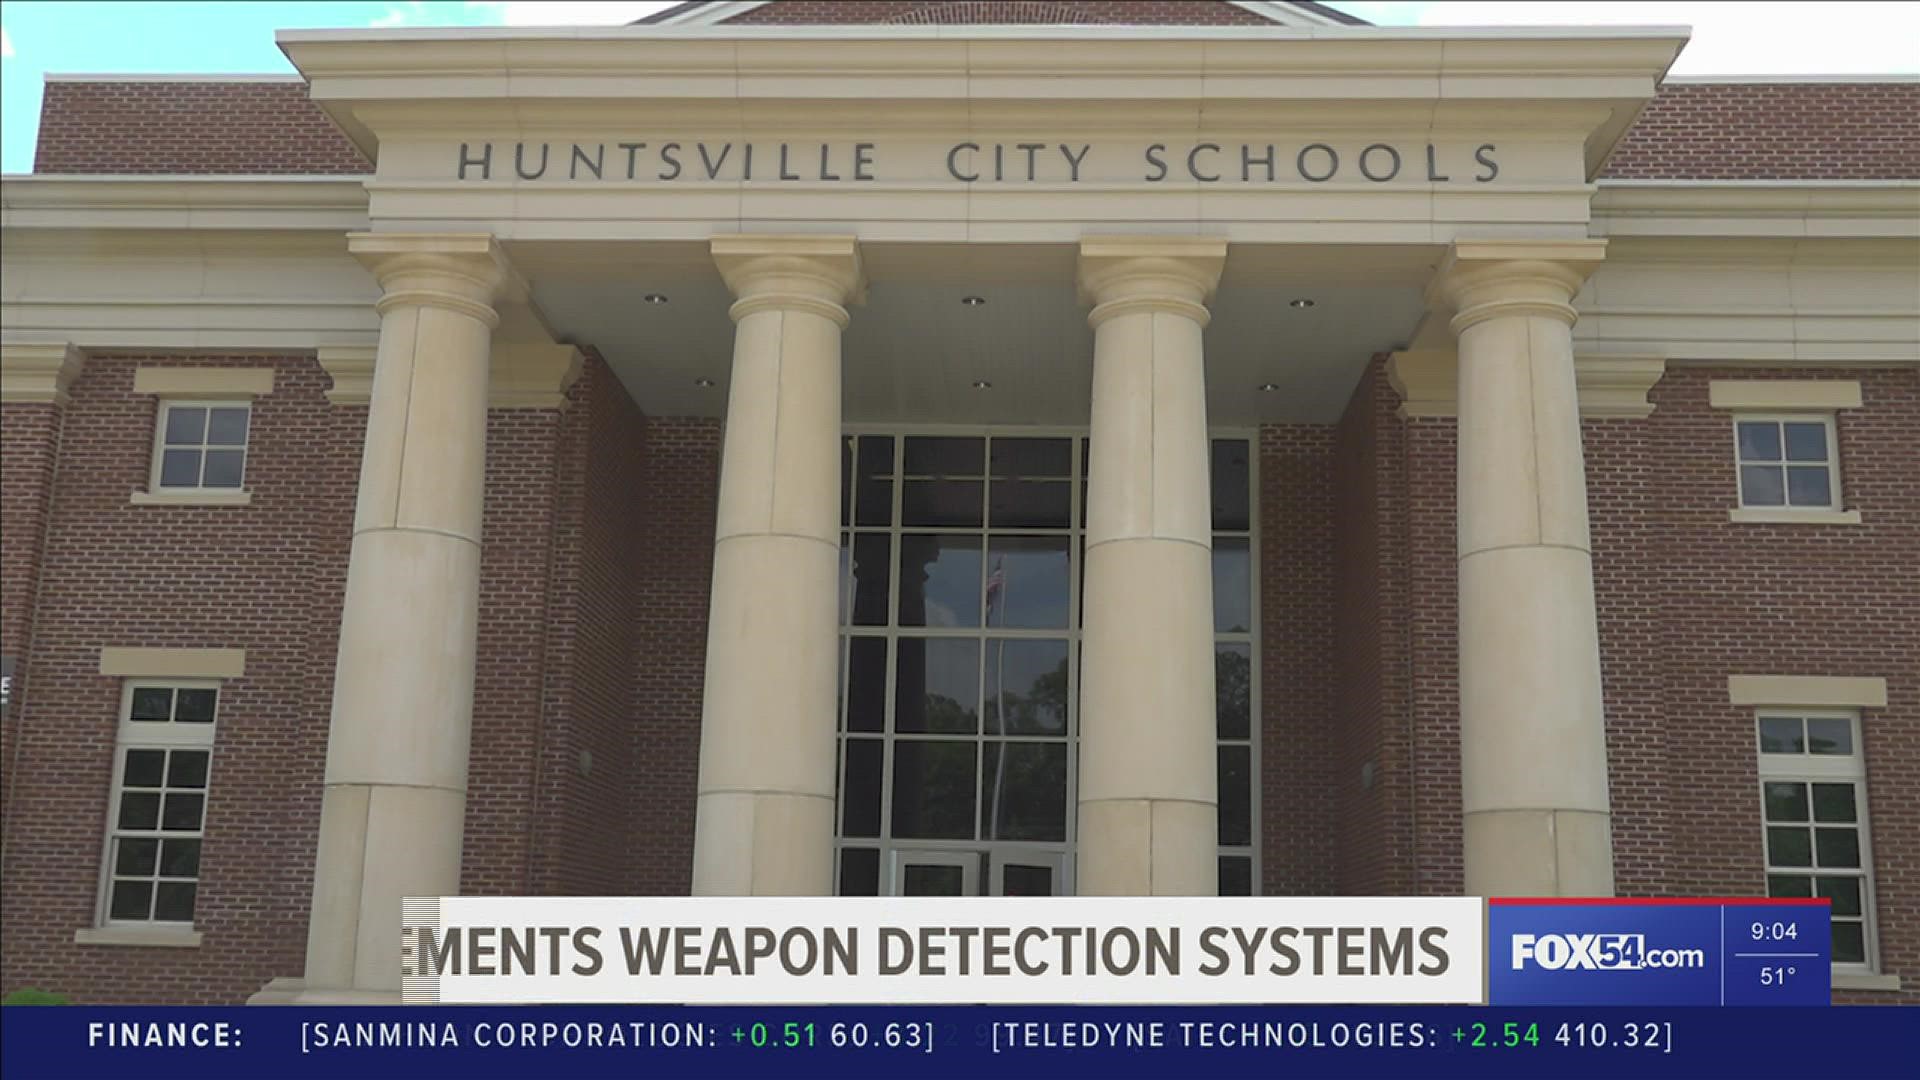 Recent incidents of guns on school campuses has prompted the school board to take action.